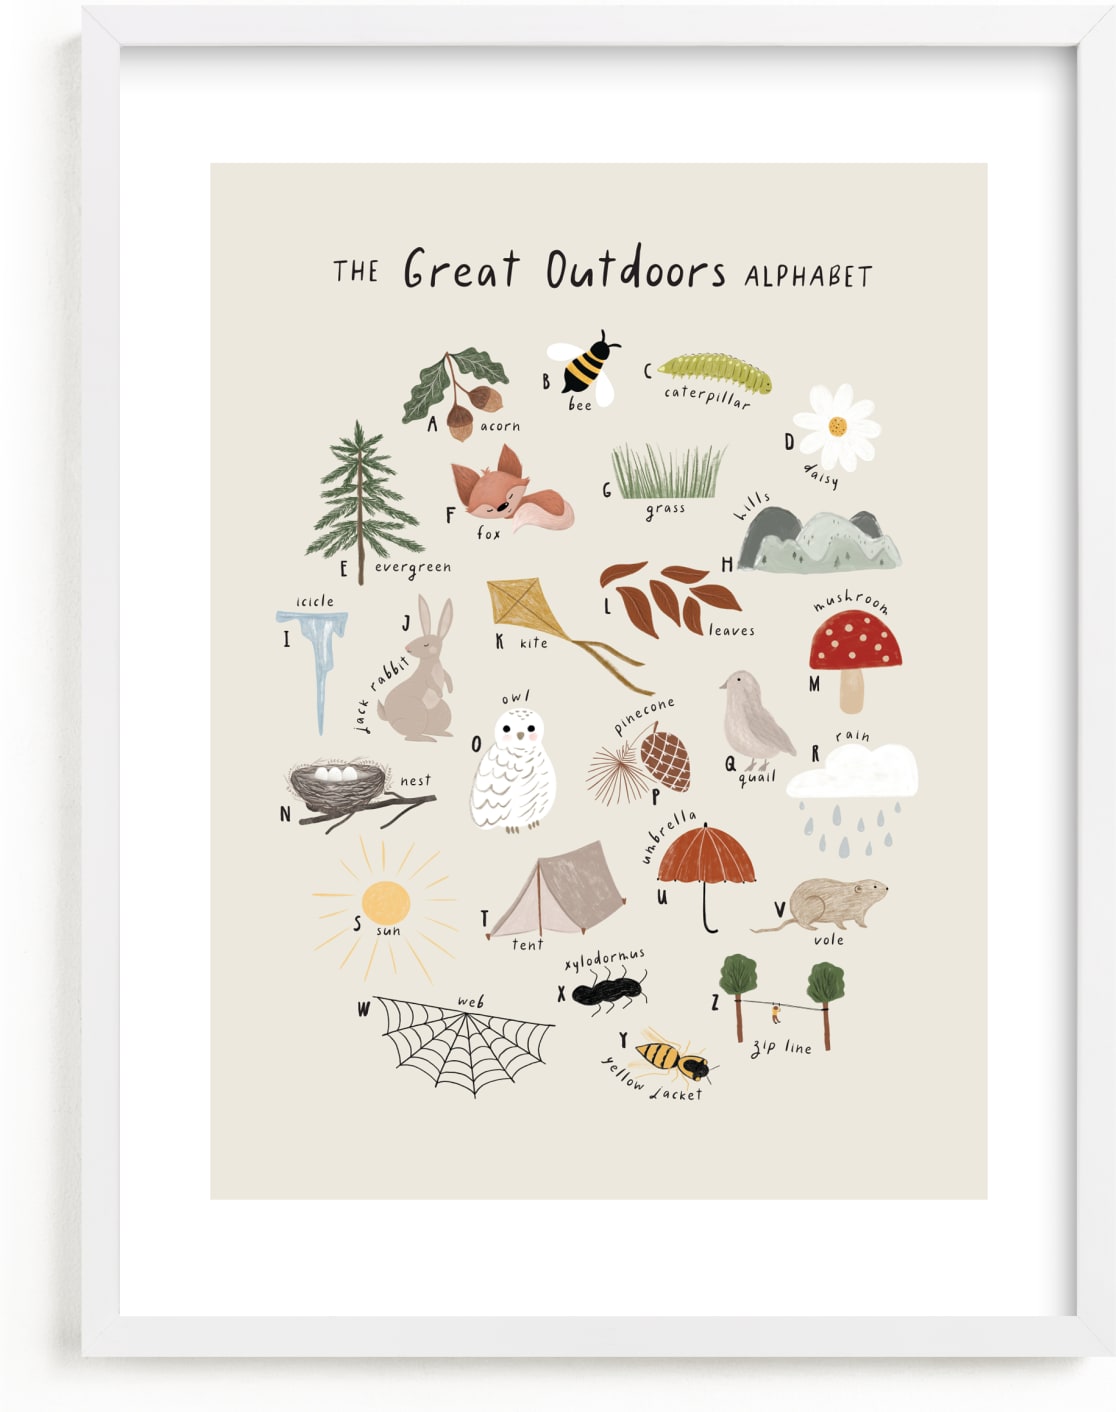 This is a brown art by Maja Cunningham called The great outdoors alphabet.